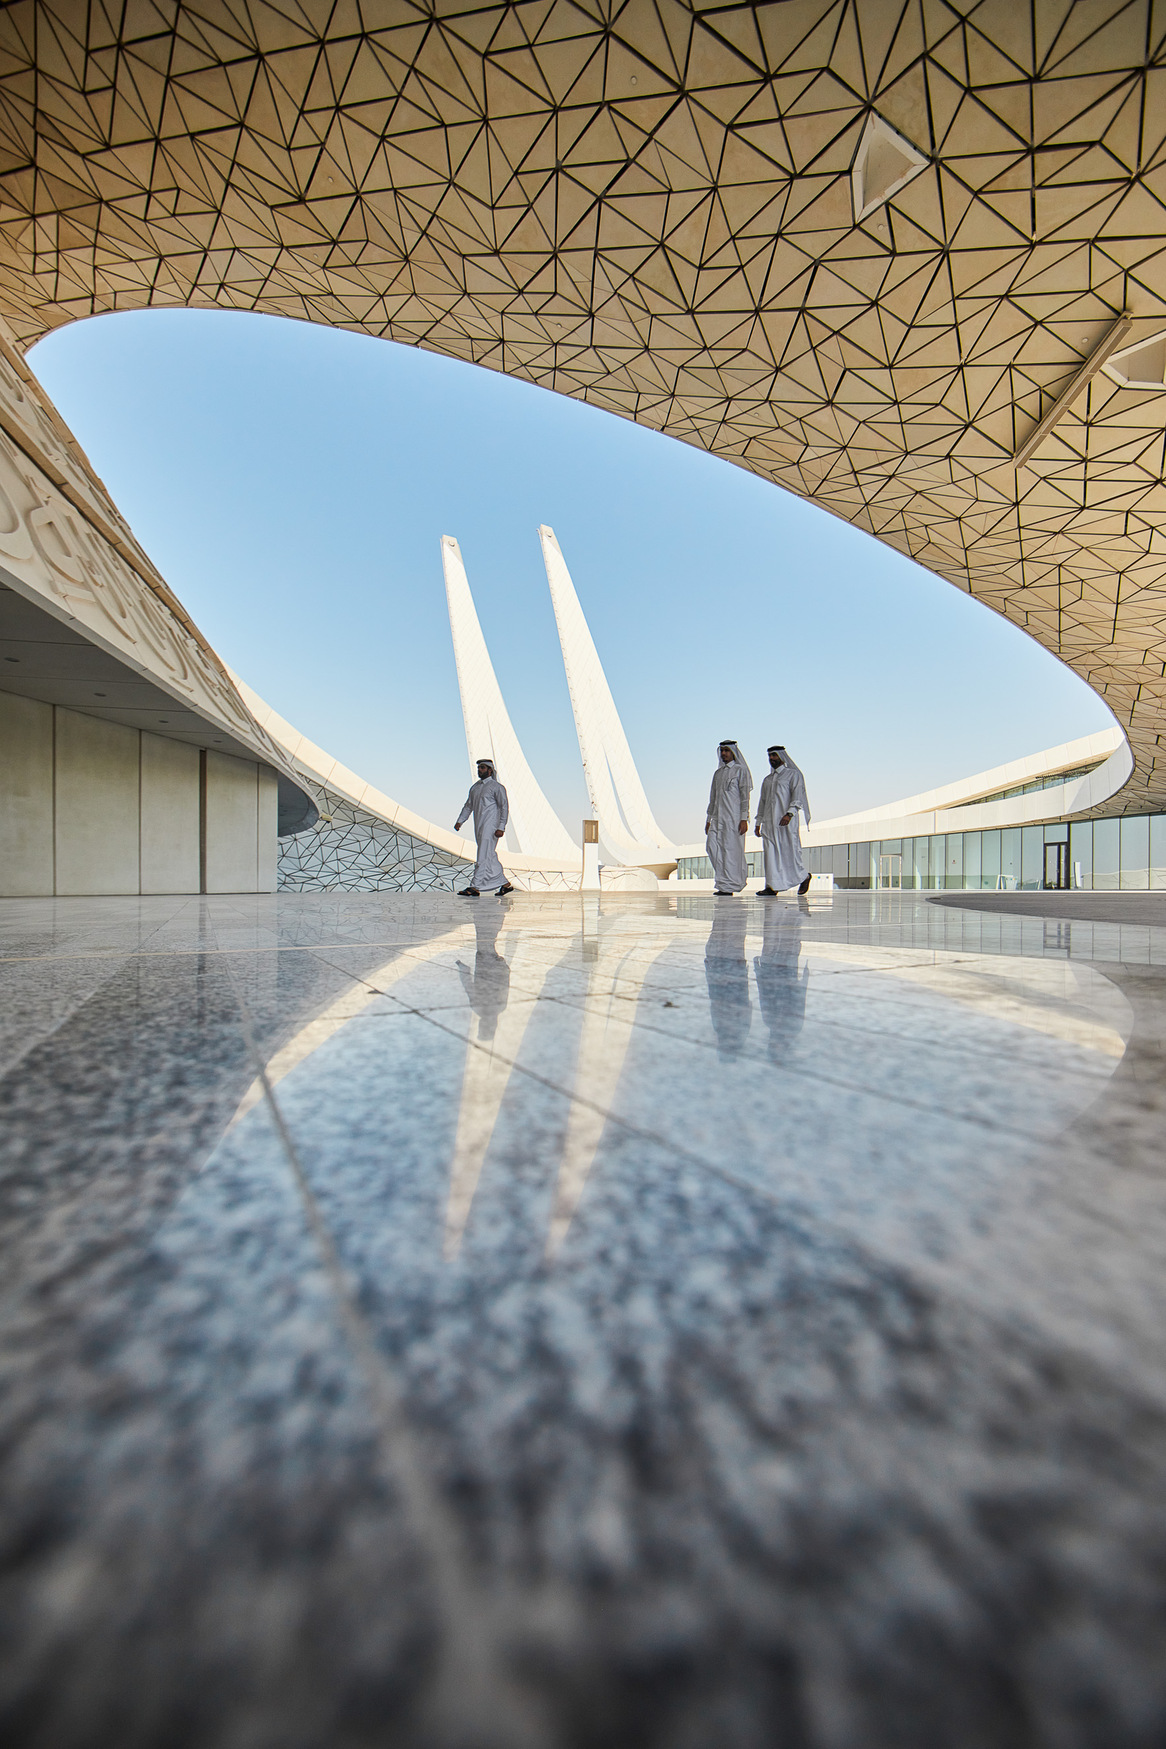 Find all the Qatar travel information you need